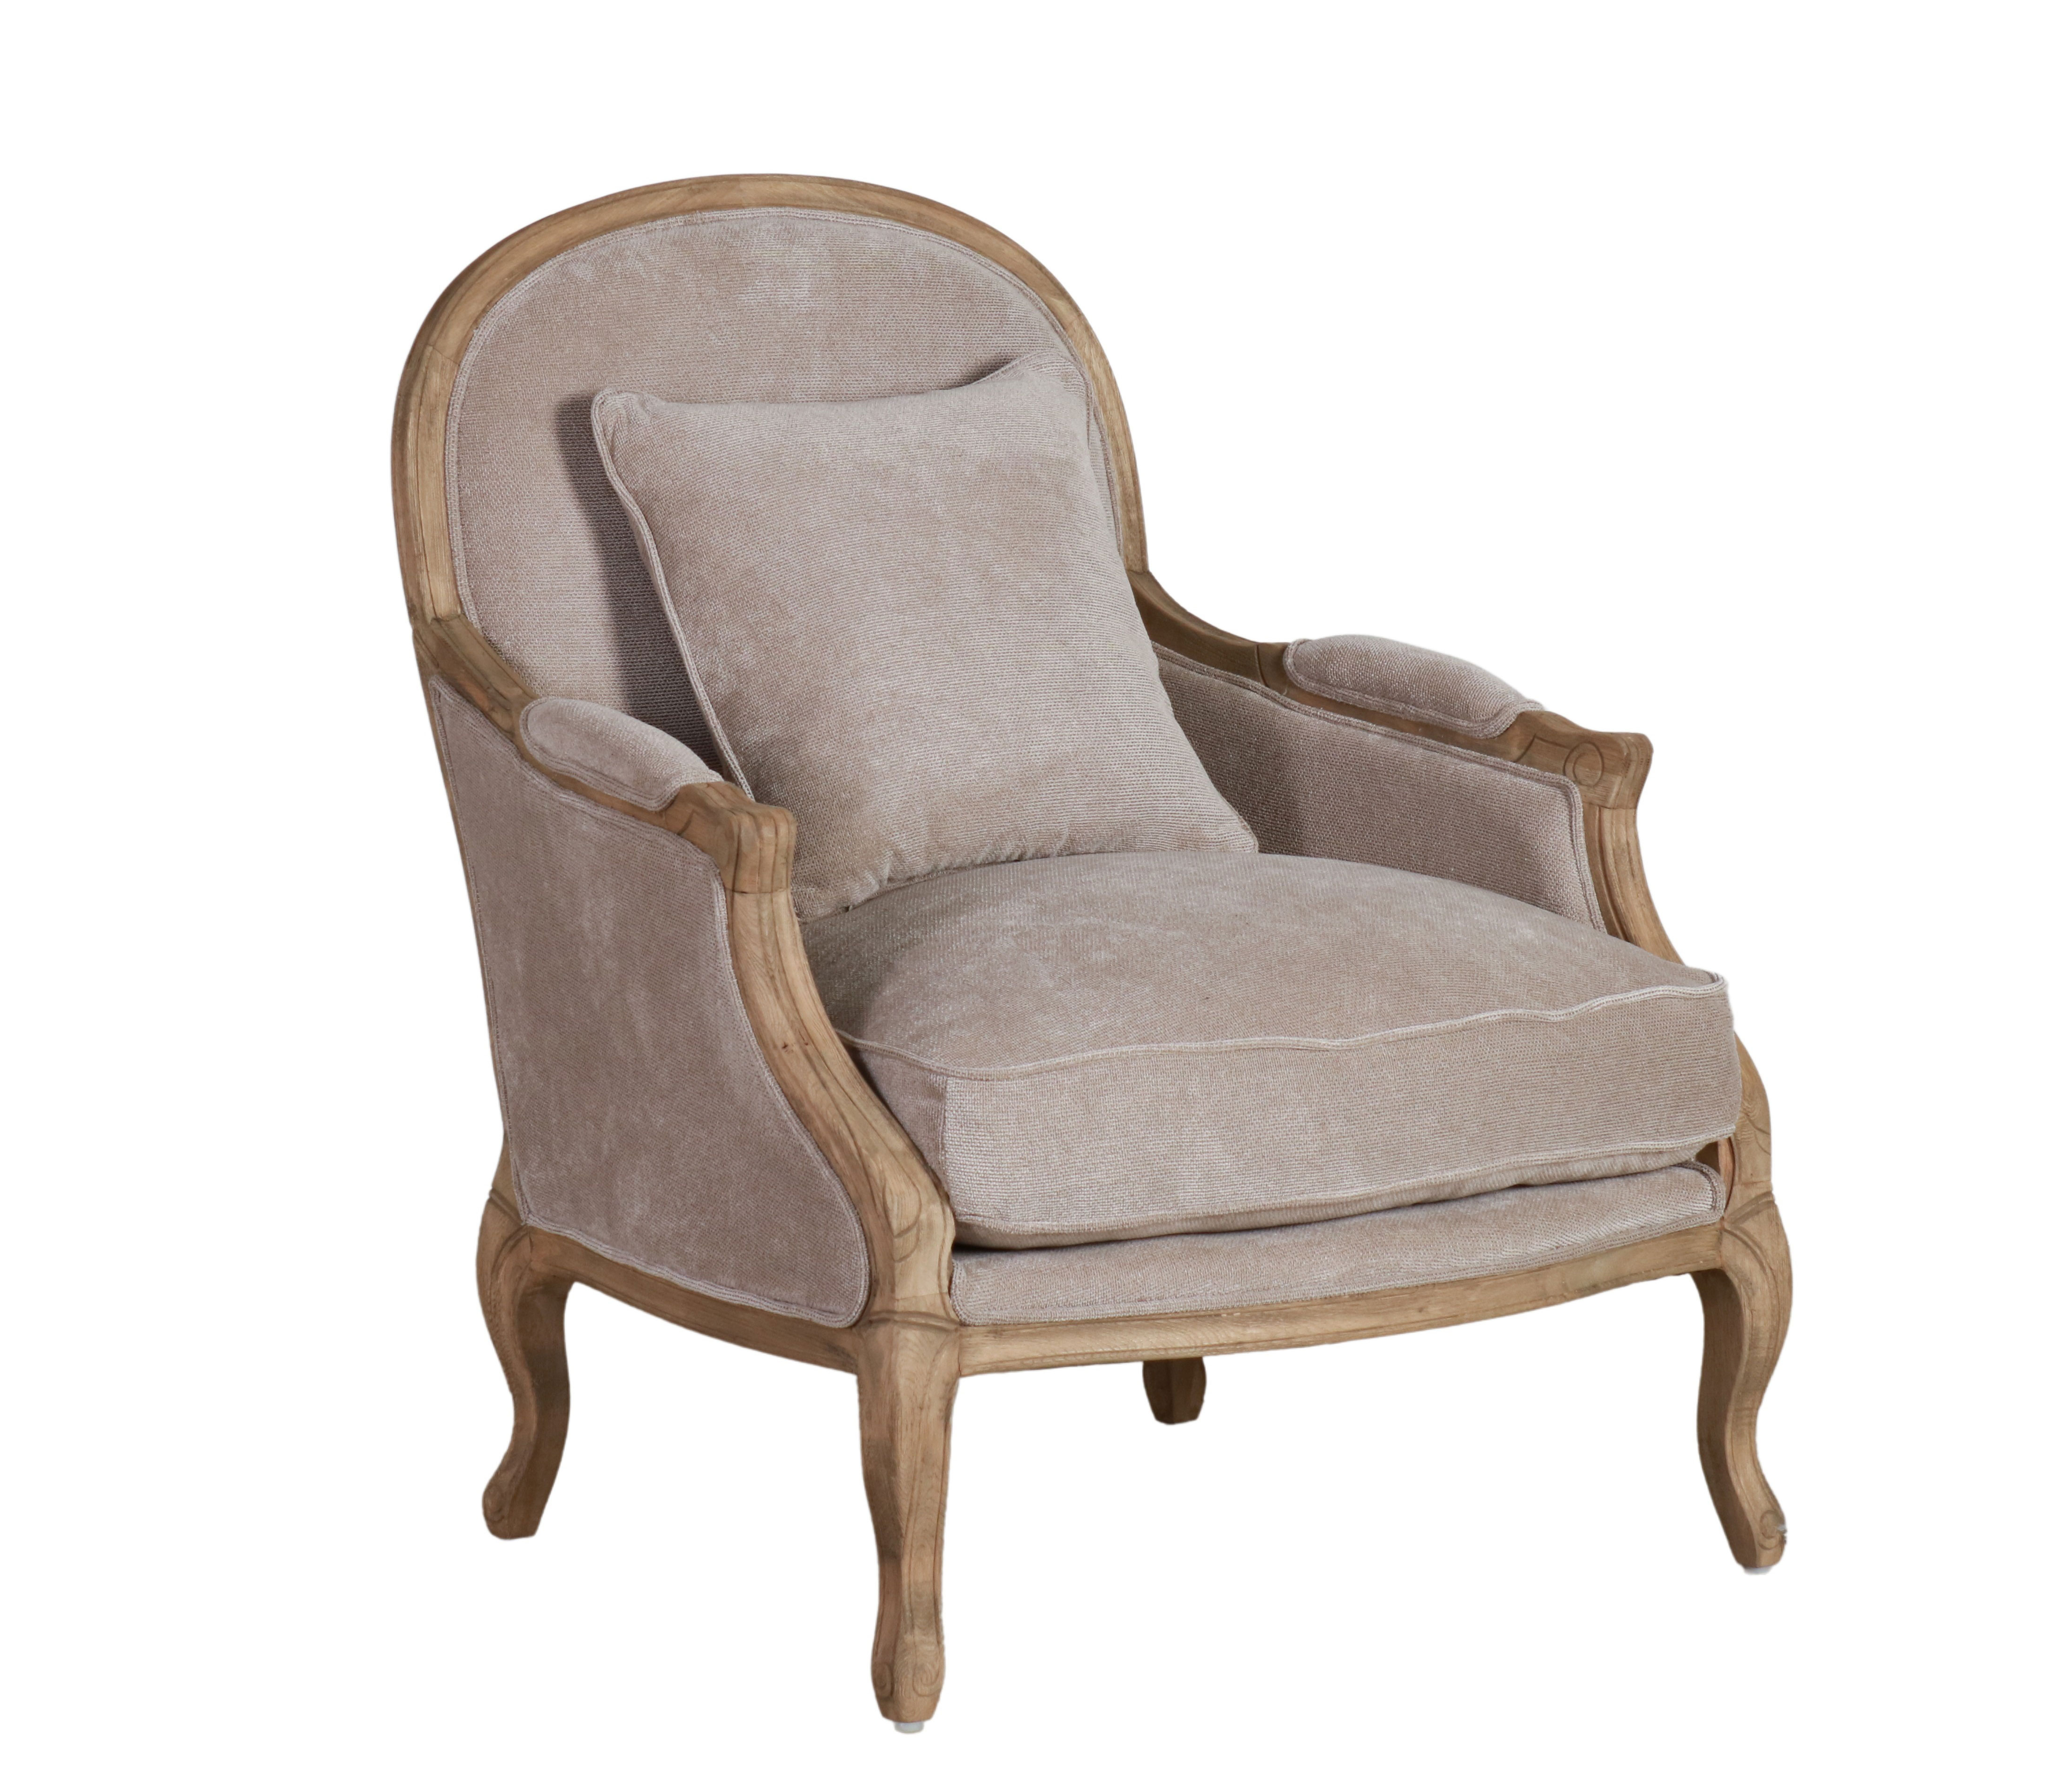 Stone upholstered armchair with oak frame